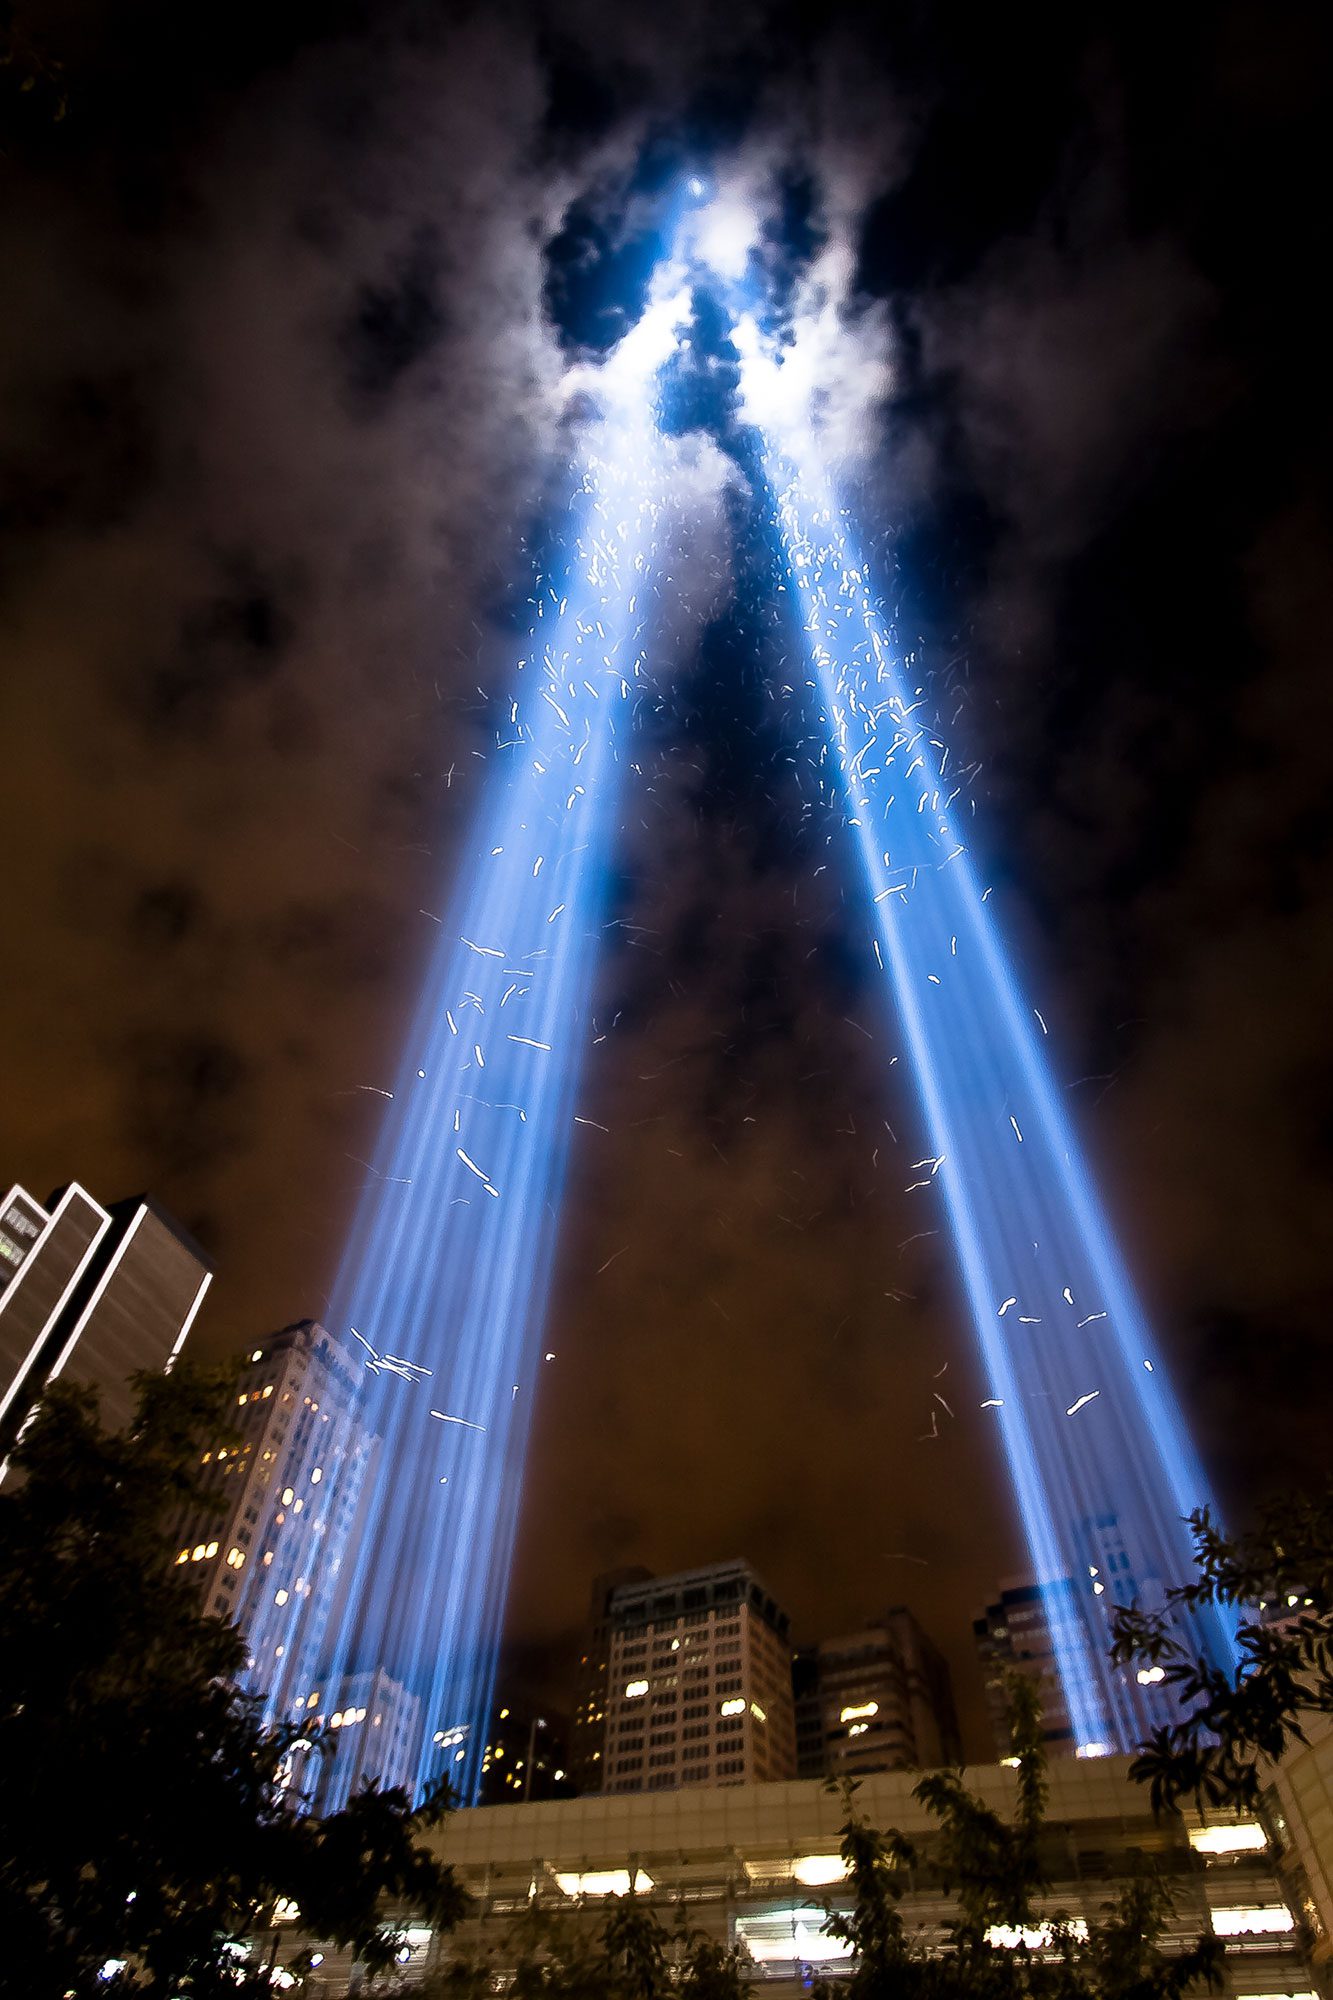 Birds flying through the twin beams at the Tribute in Light appear as illuminated streaks in the bright beams. Photo by John de Guzman.